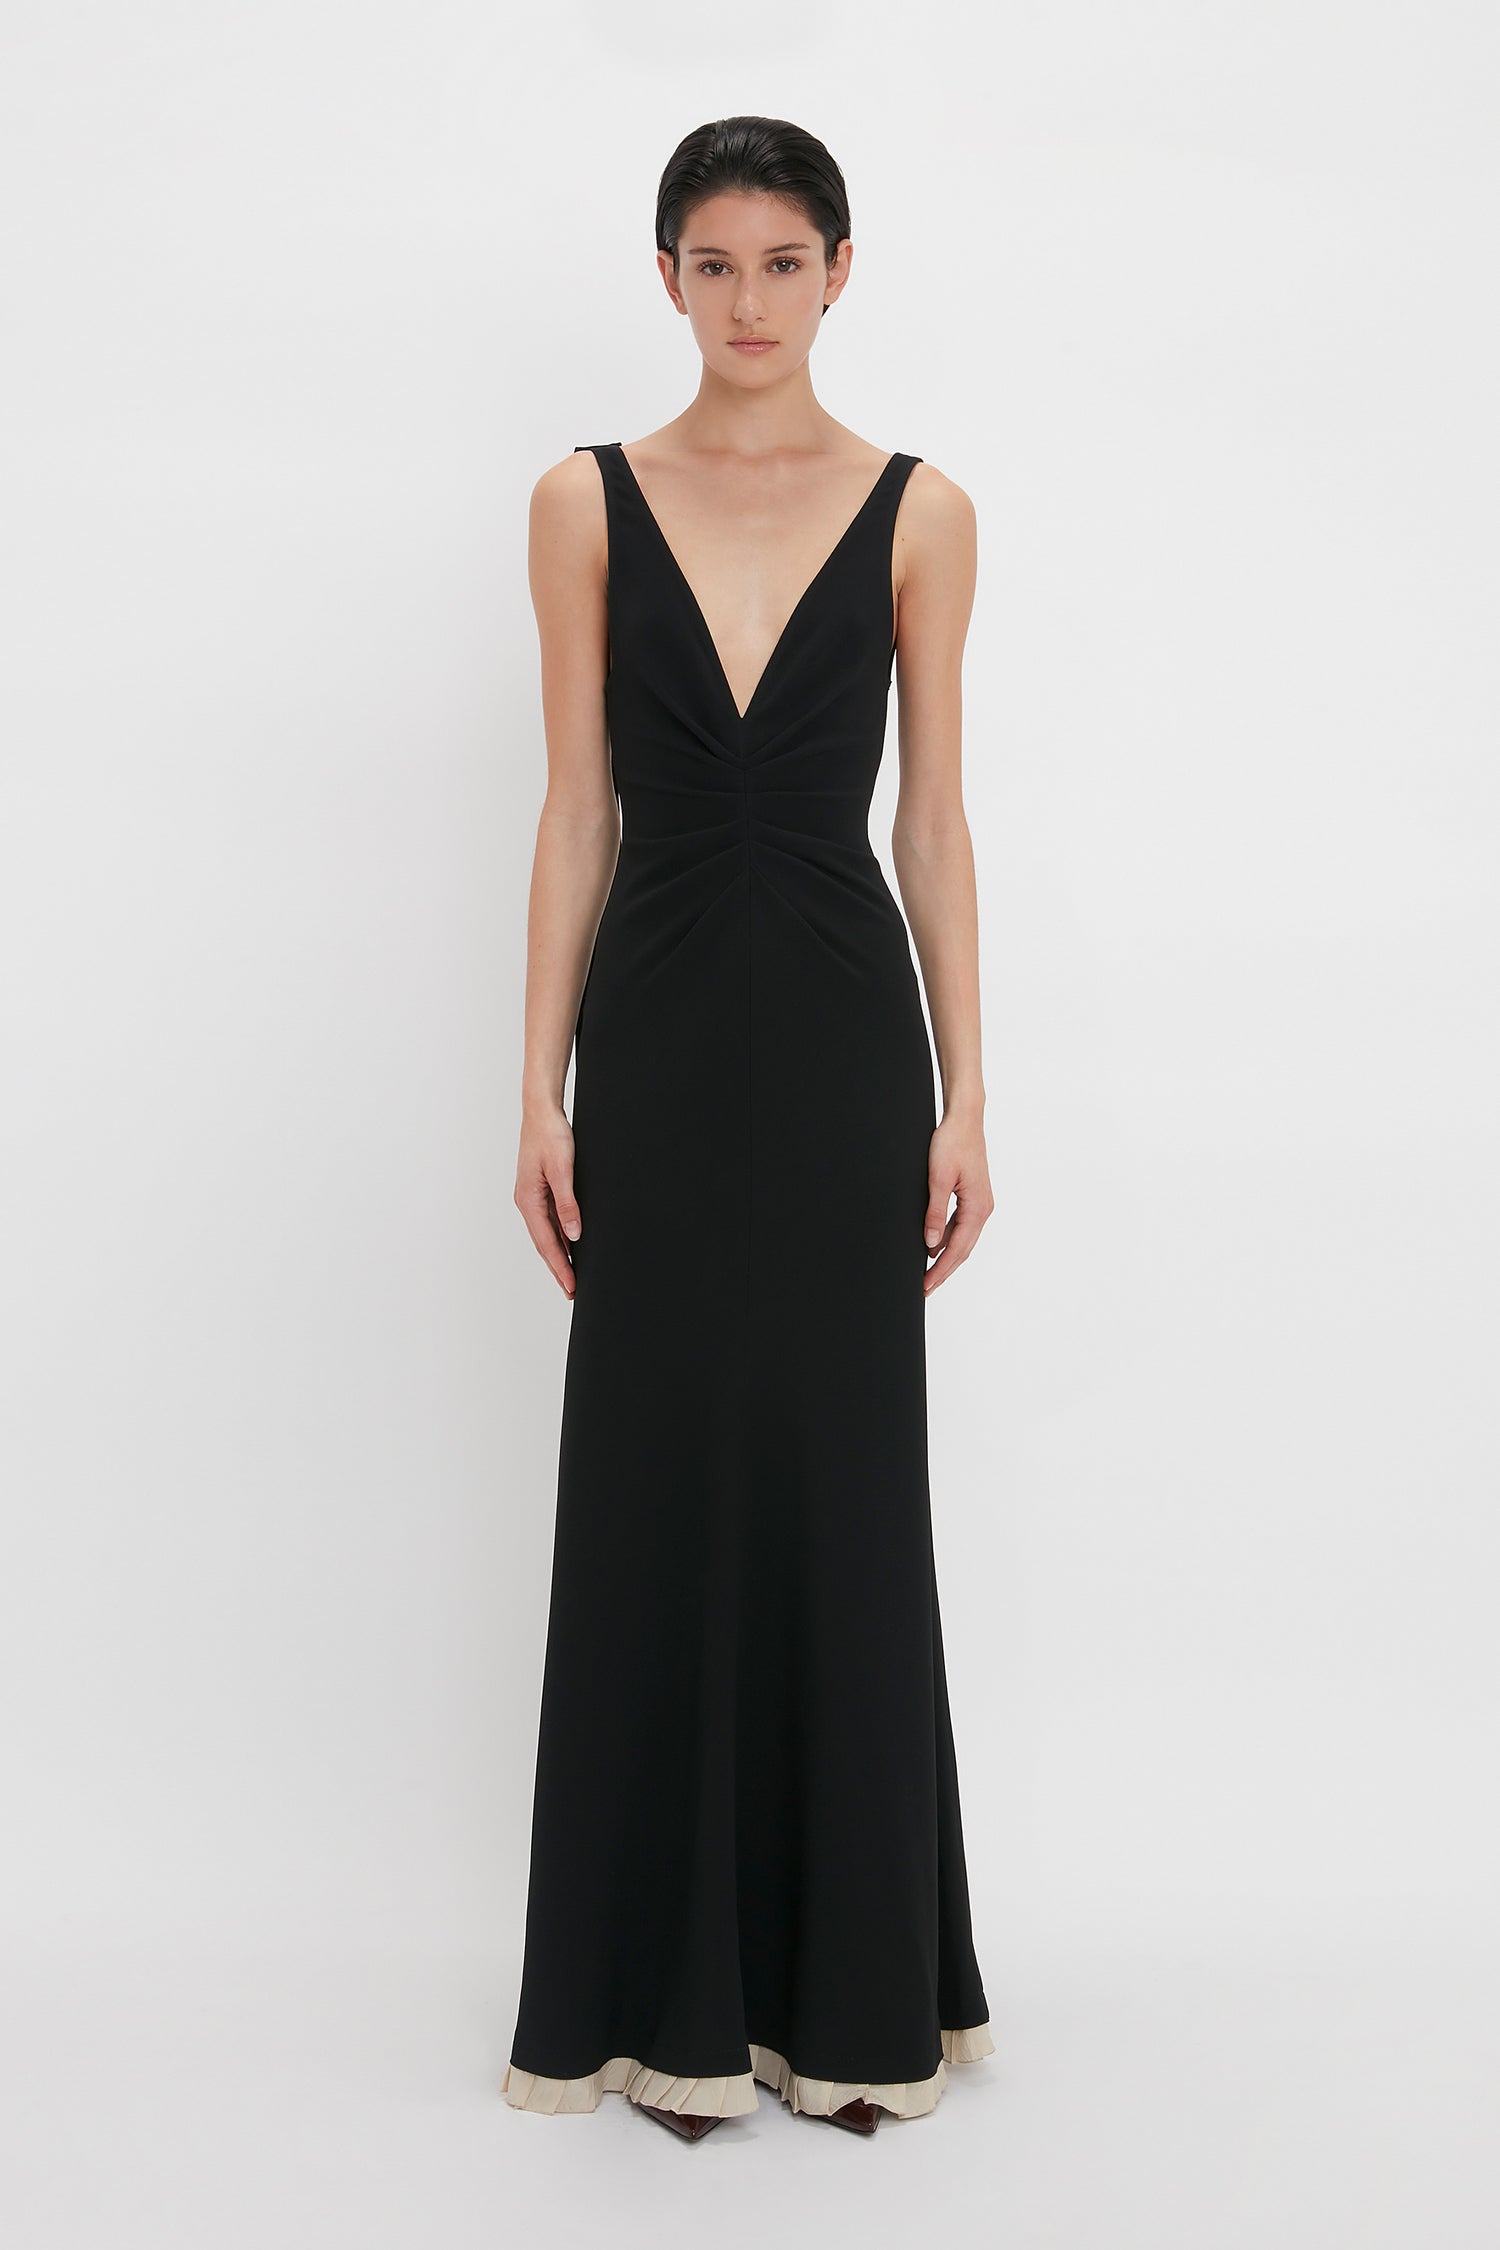 A person stands against a white background, wearing a sleeveless, floor-length black gown with a deep V-neckline and pleated details. The **V-Neck Gathered Waist Floor-Length Gown In Black** by **Victoria Beckham** features a gathered waist and a contrasting light-colored hem, adding an elegant touch.